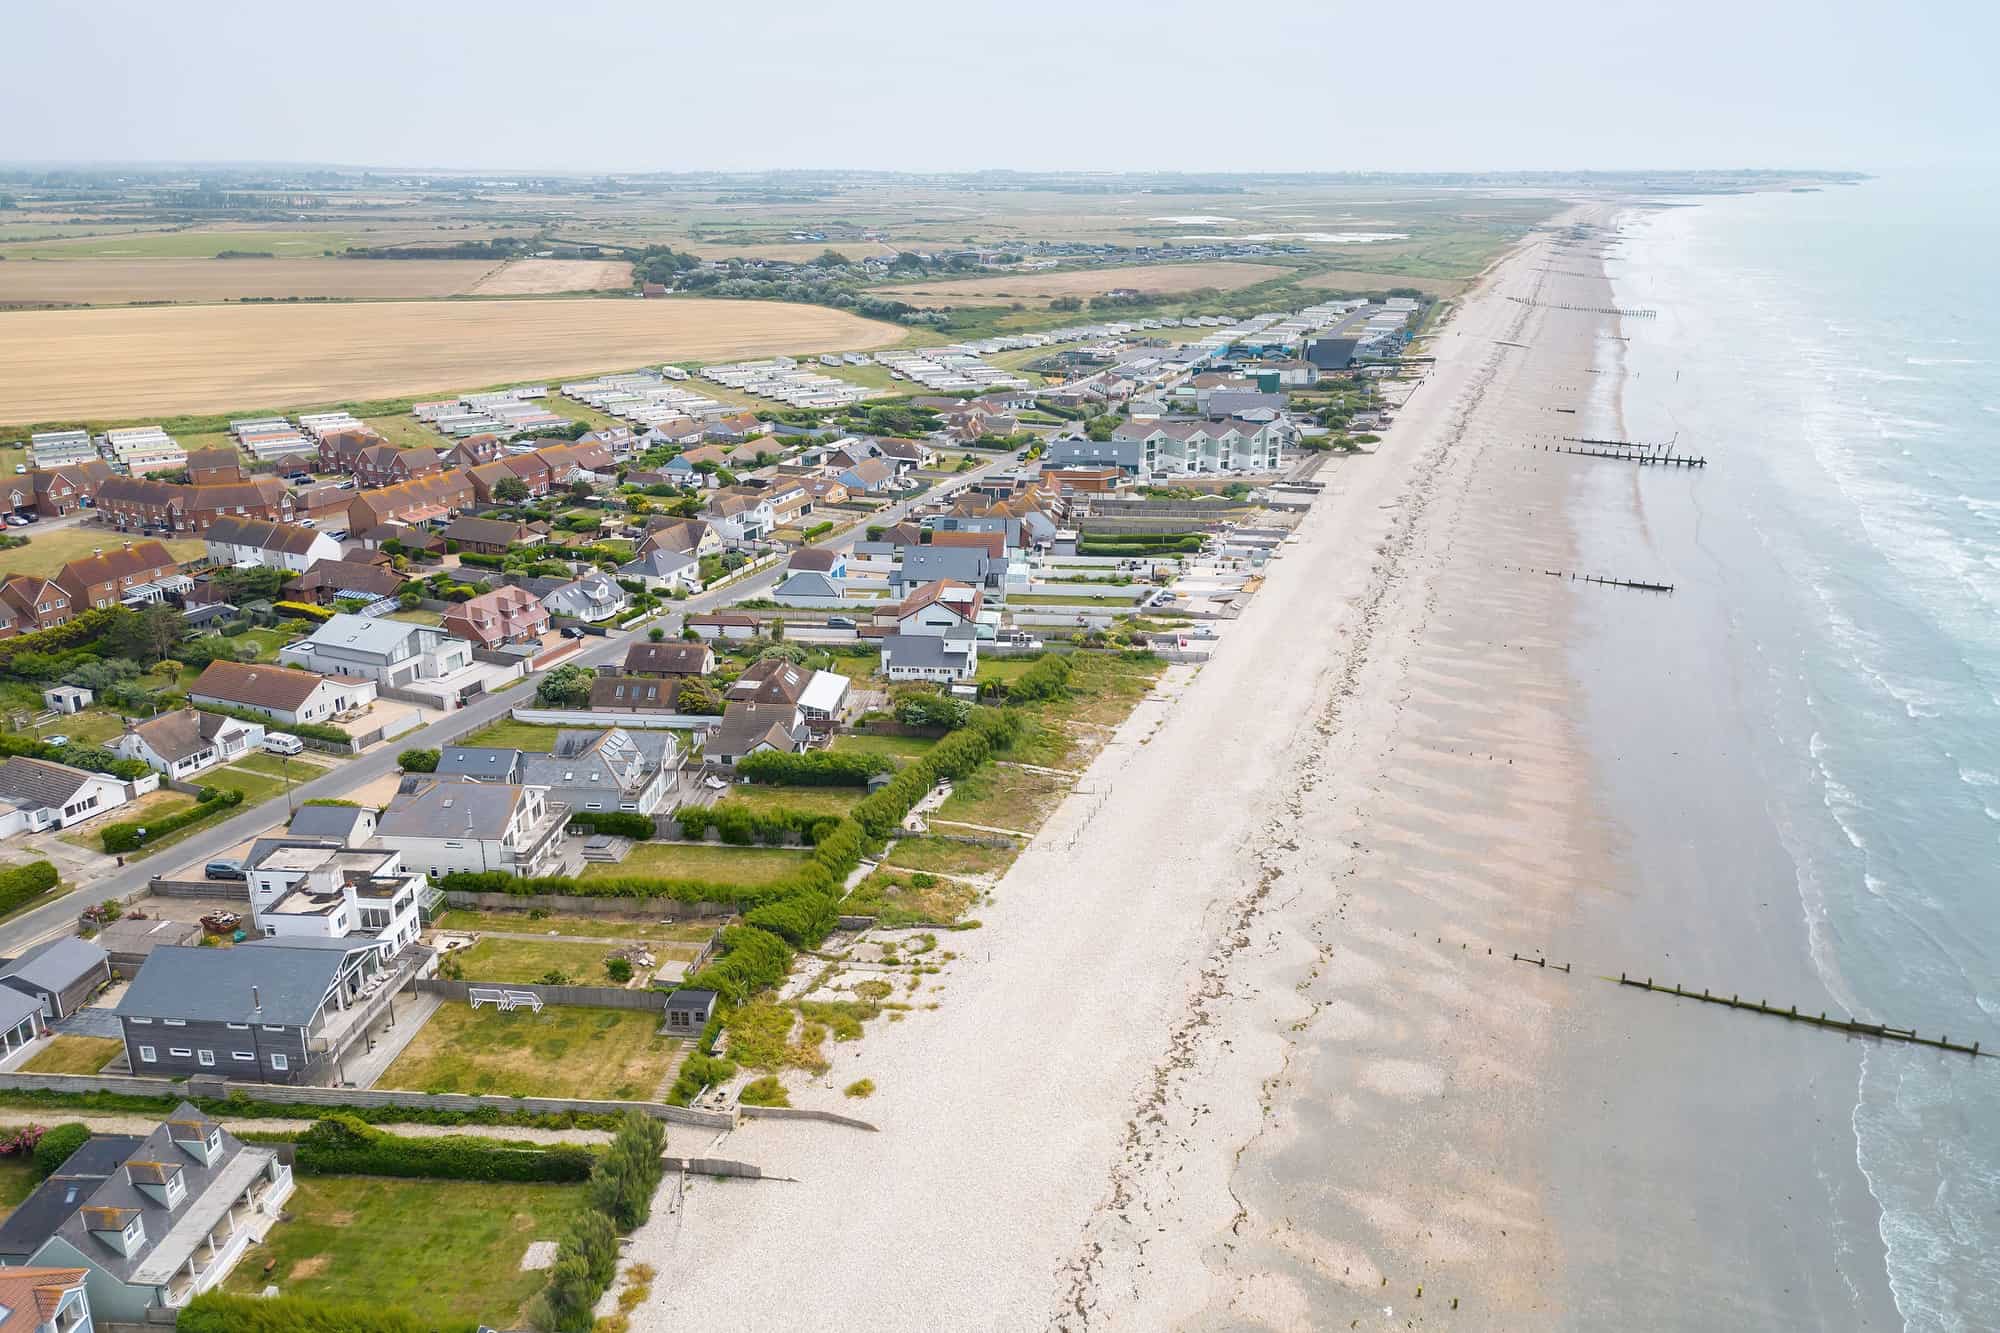 Bracklesham Bay PO20 -A beautiful beach house situated directly on the shoreline. New England style interiors and a separate Yoga Studio - The Location Guys